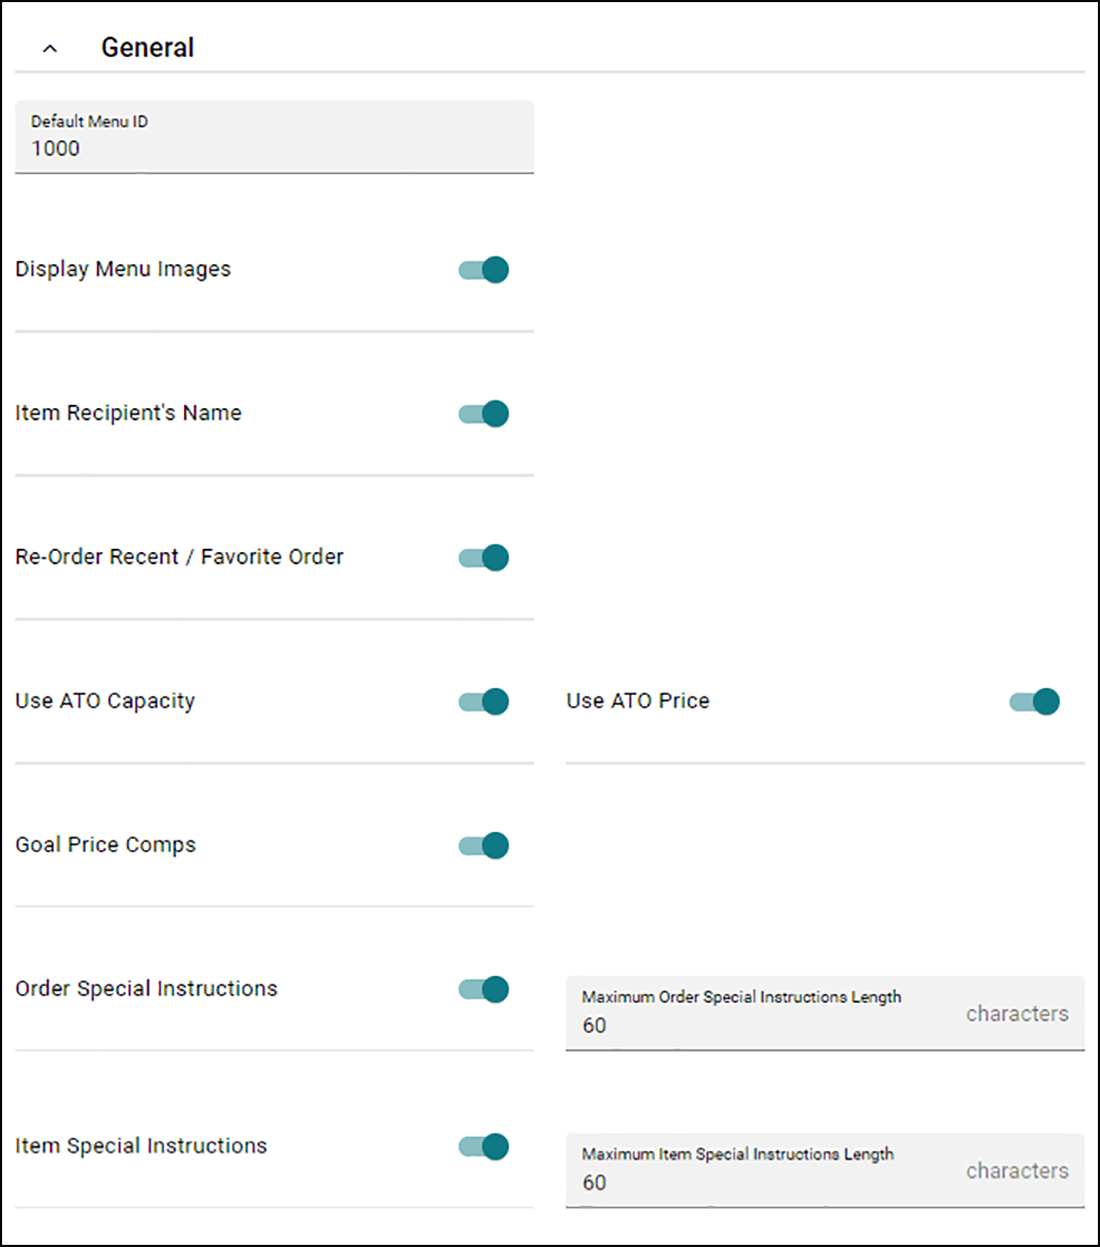 General Section of Ordering Settings tab